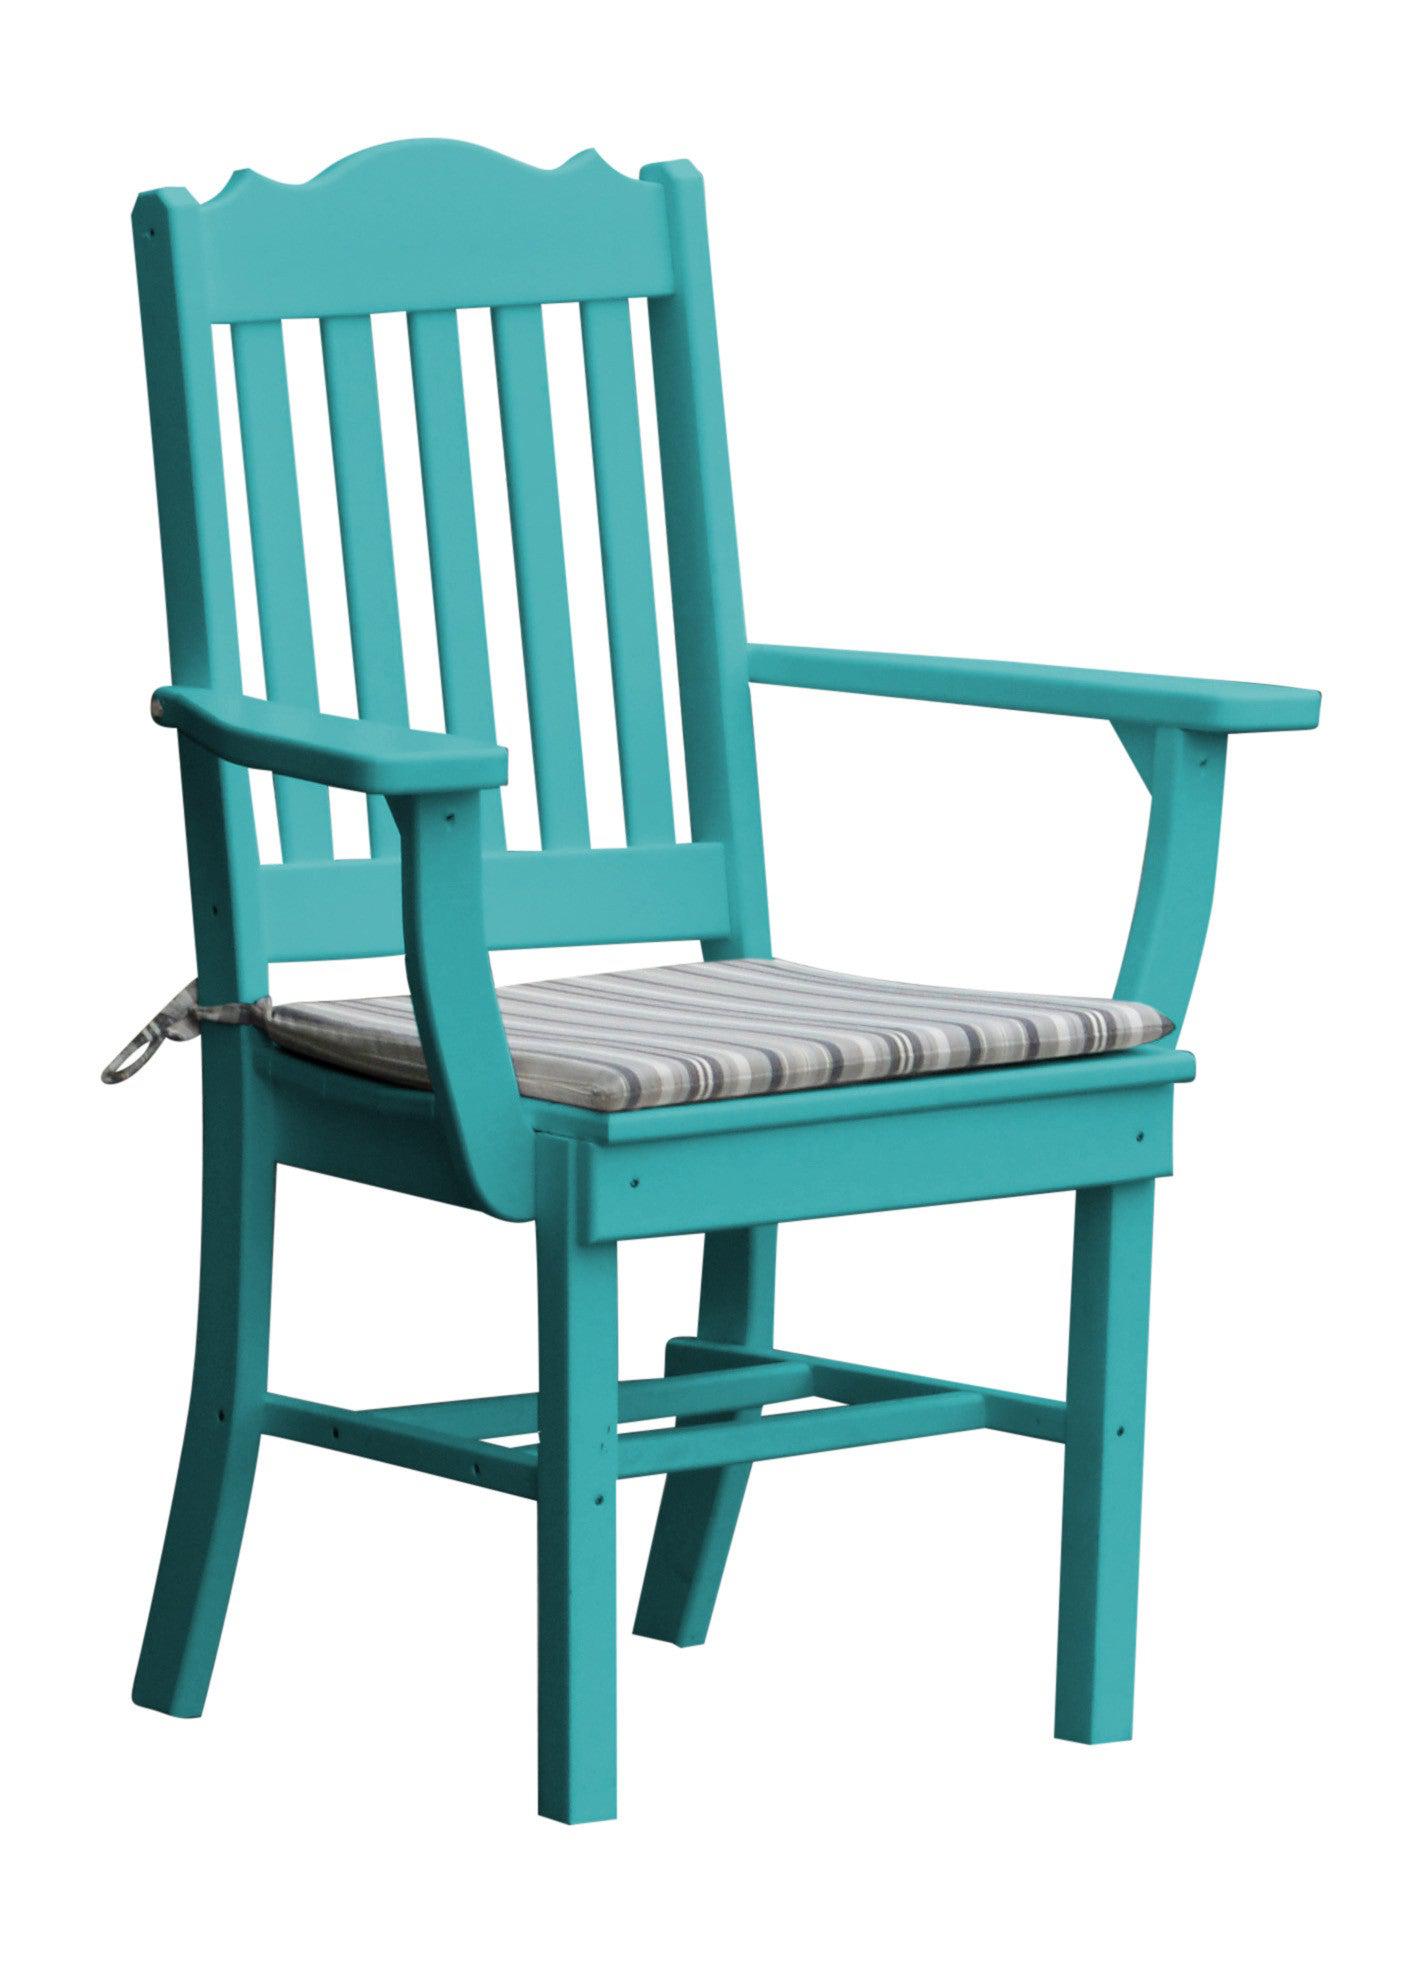 A&L Furniture Company Recycled Plastic Royal Dining Chair w/ Arms - Aruba Blue